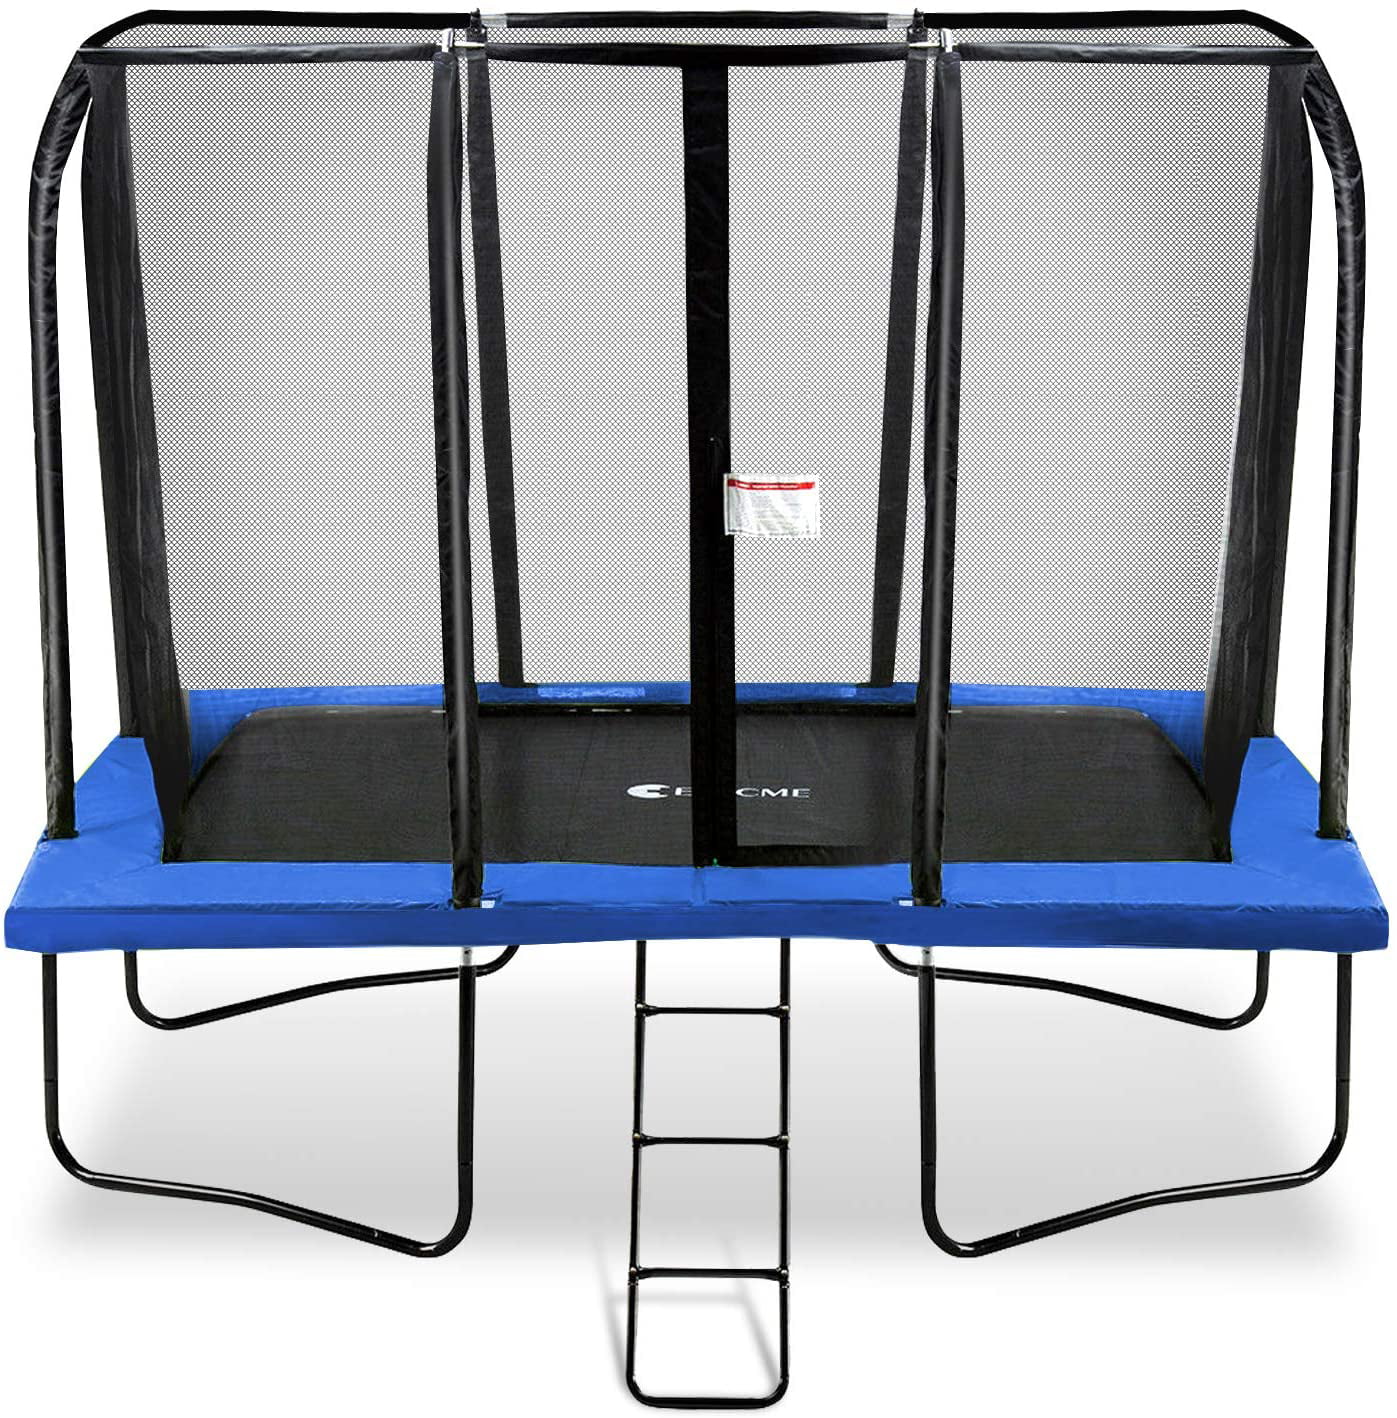 Exacme 7x10 Foot Rectangle Trampoline with Enclosure for Kids(Blue) 6184-0710B